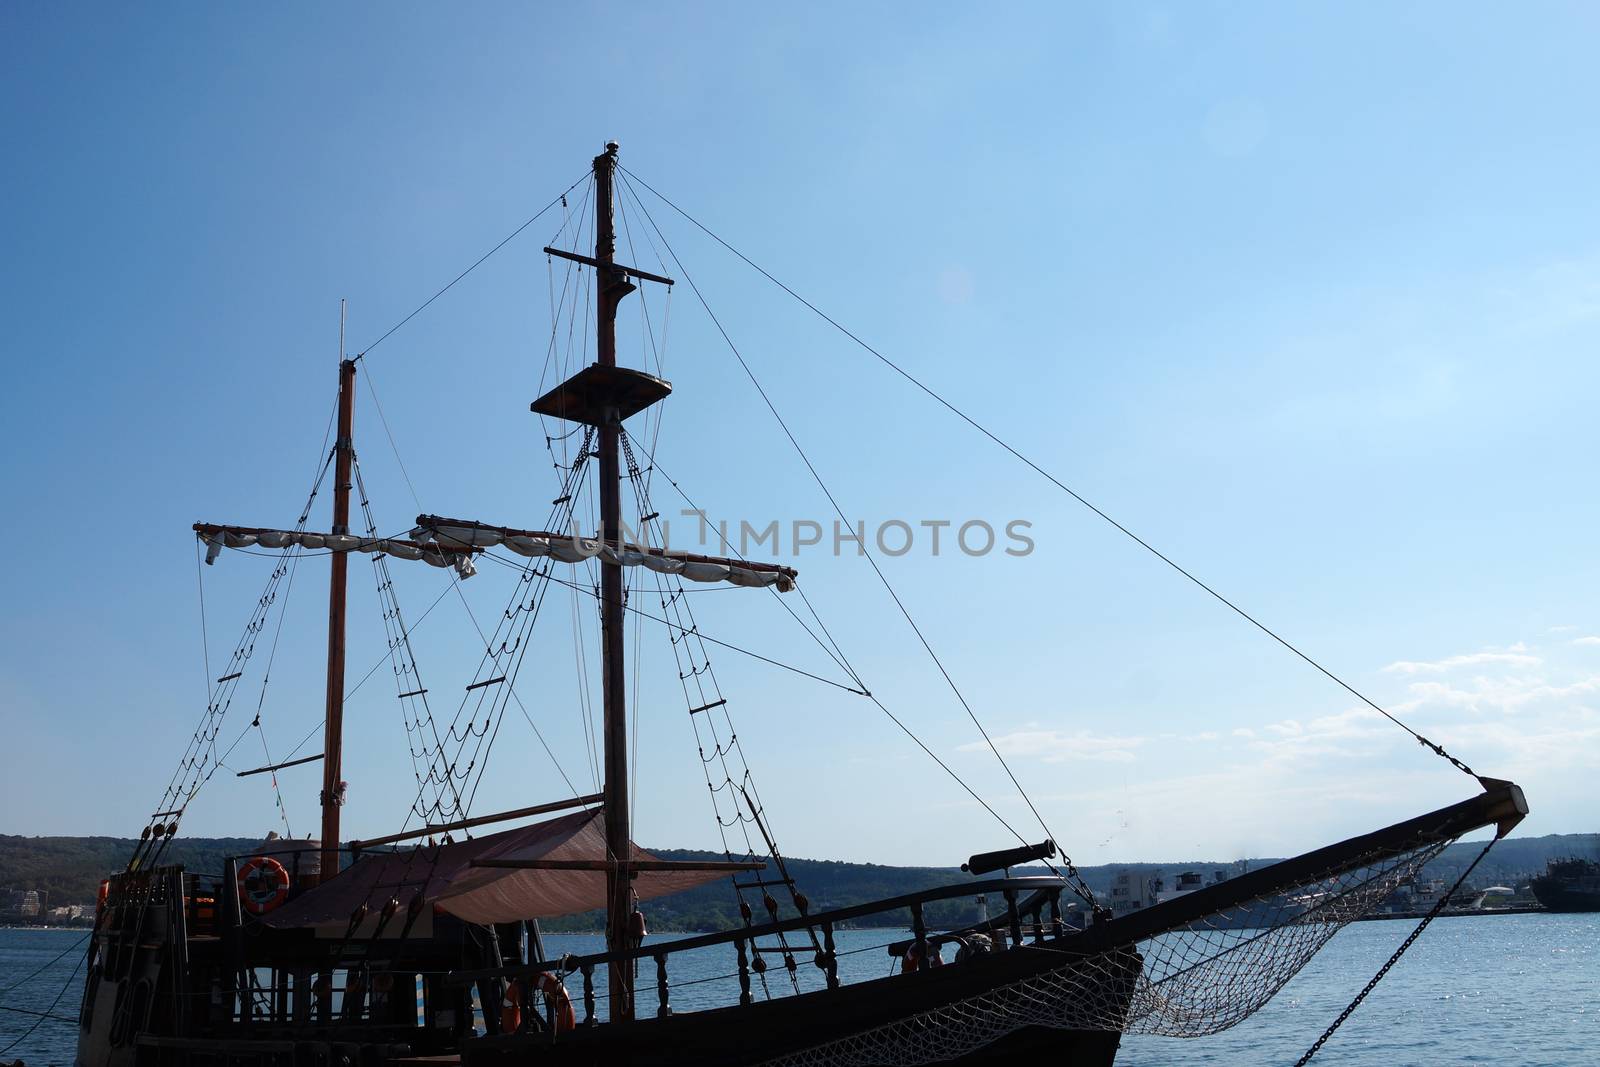 deck of an old ship with masts against a blue sunset sky.